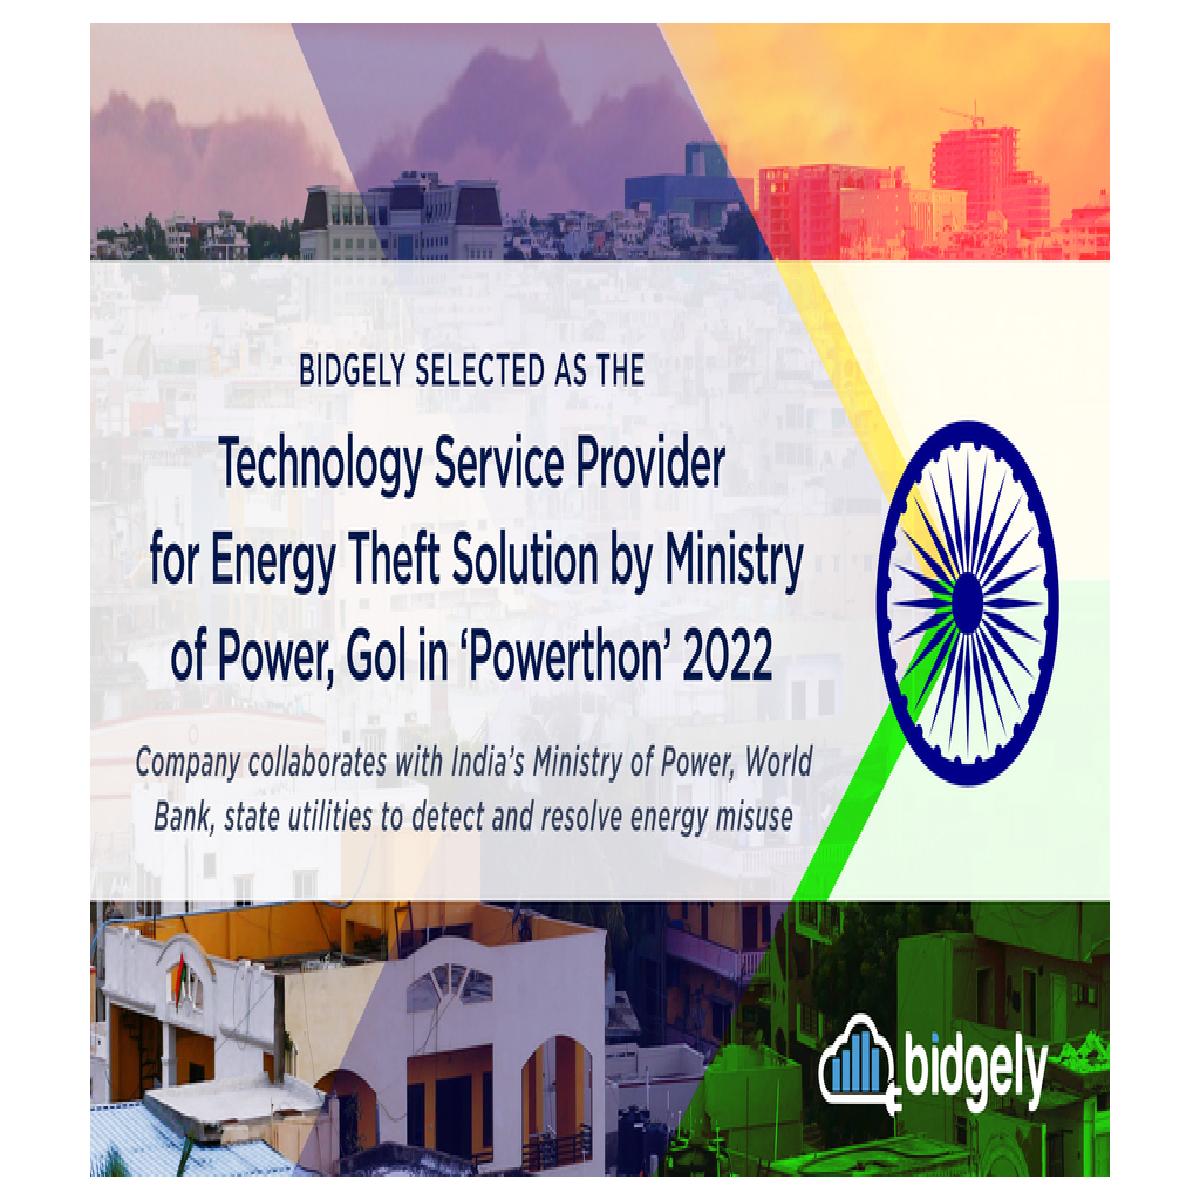 Bidgely Selected as the Technology Service Provider for Energy Theft Solution by Ministry of Power, Govt of India